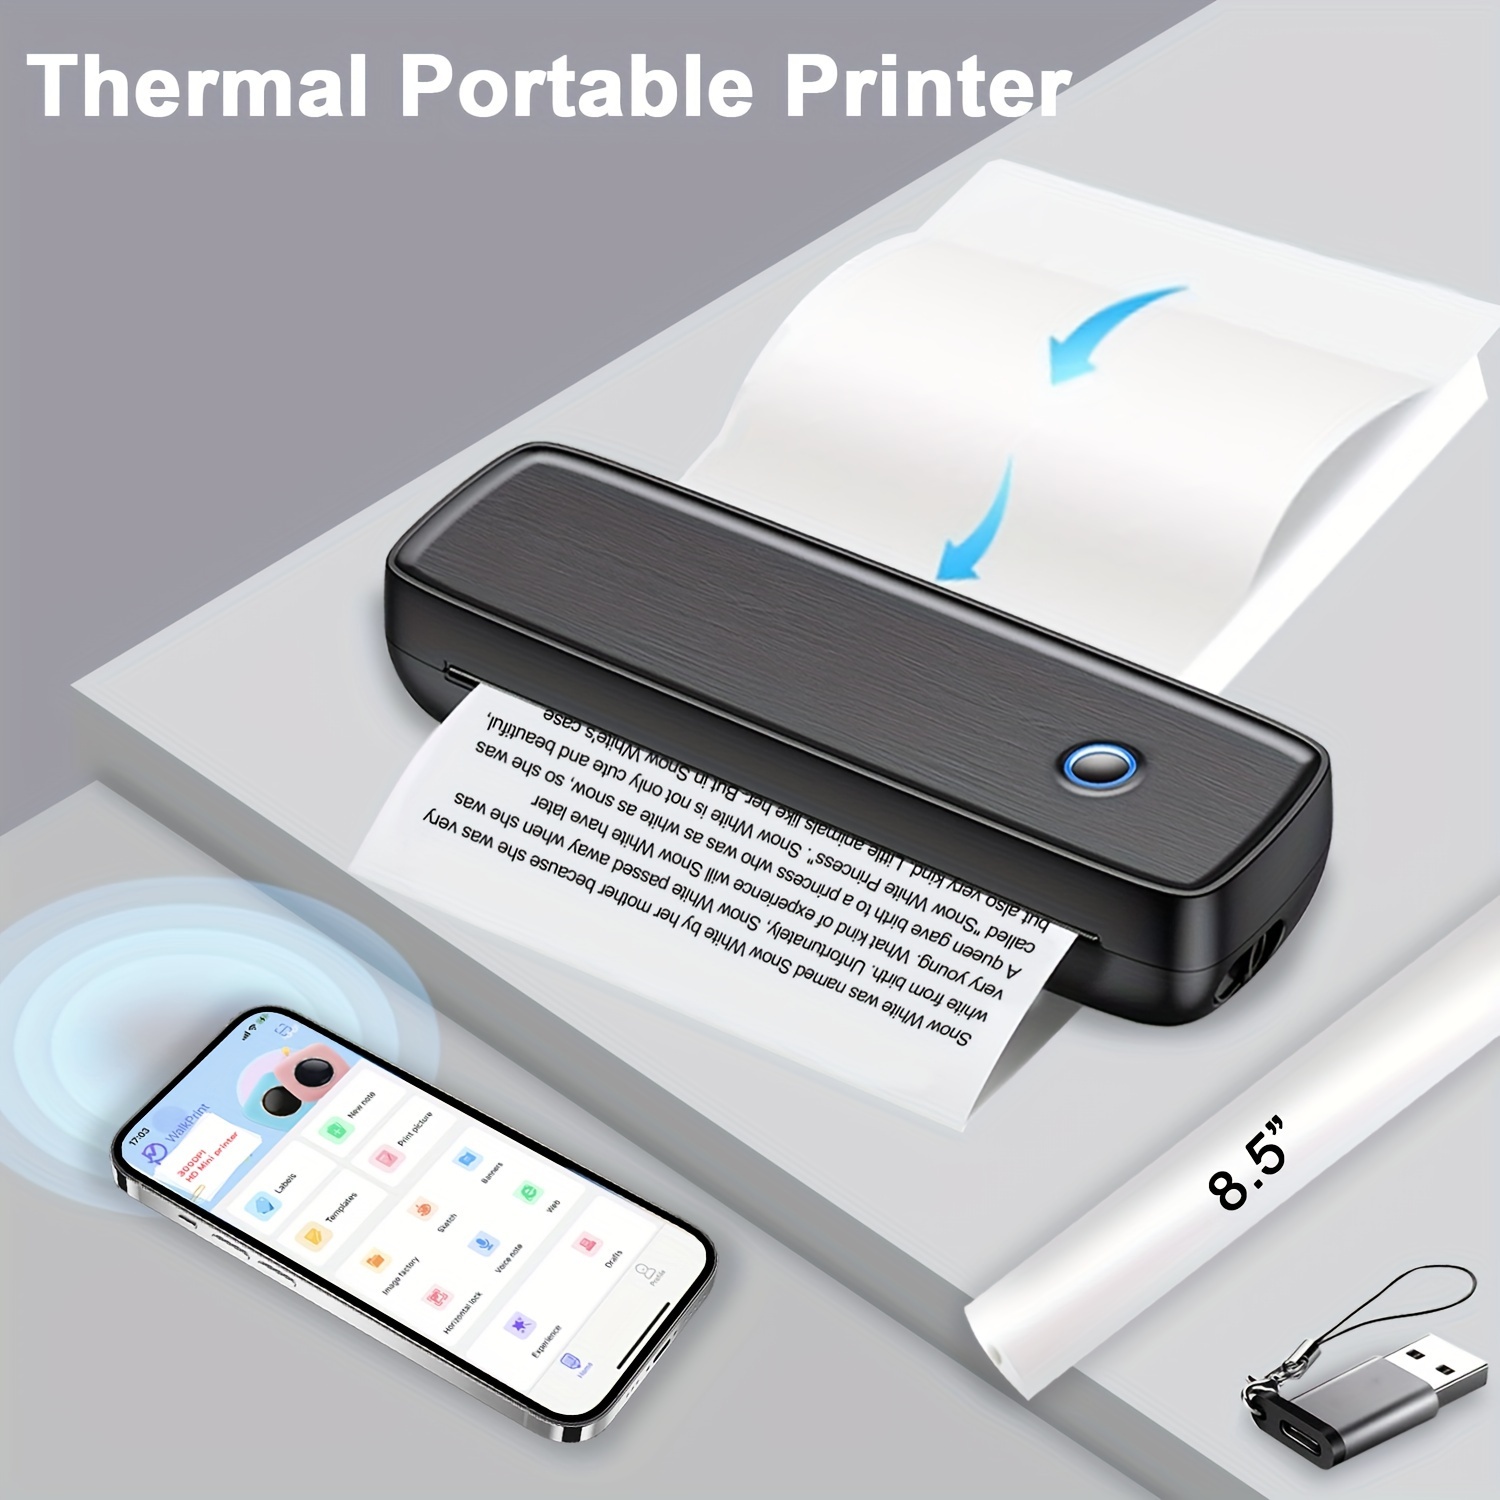 Phomemo Wireless Portable Printer Supports A4 8 27 X11 69 Inkless